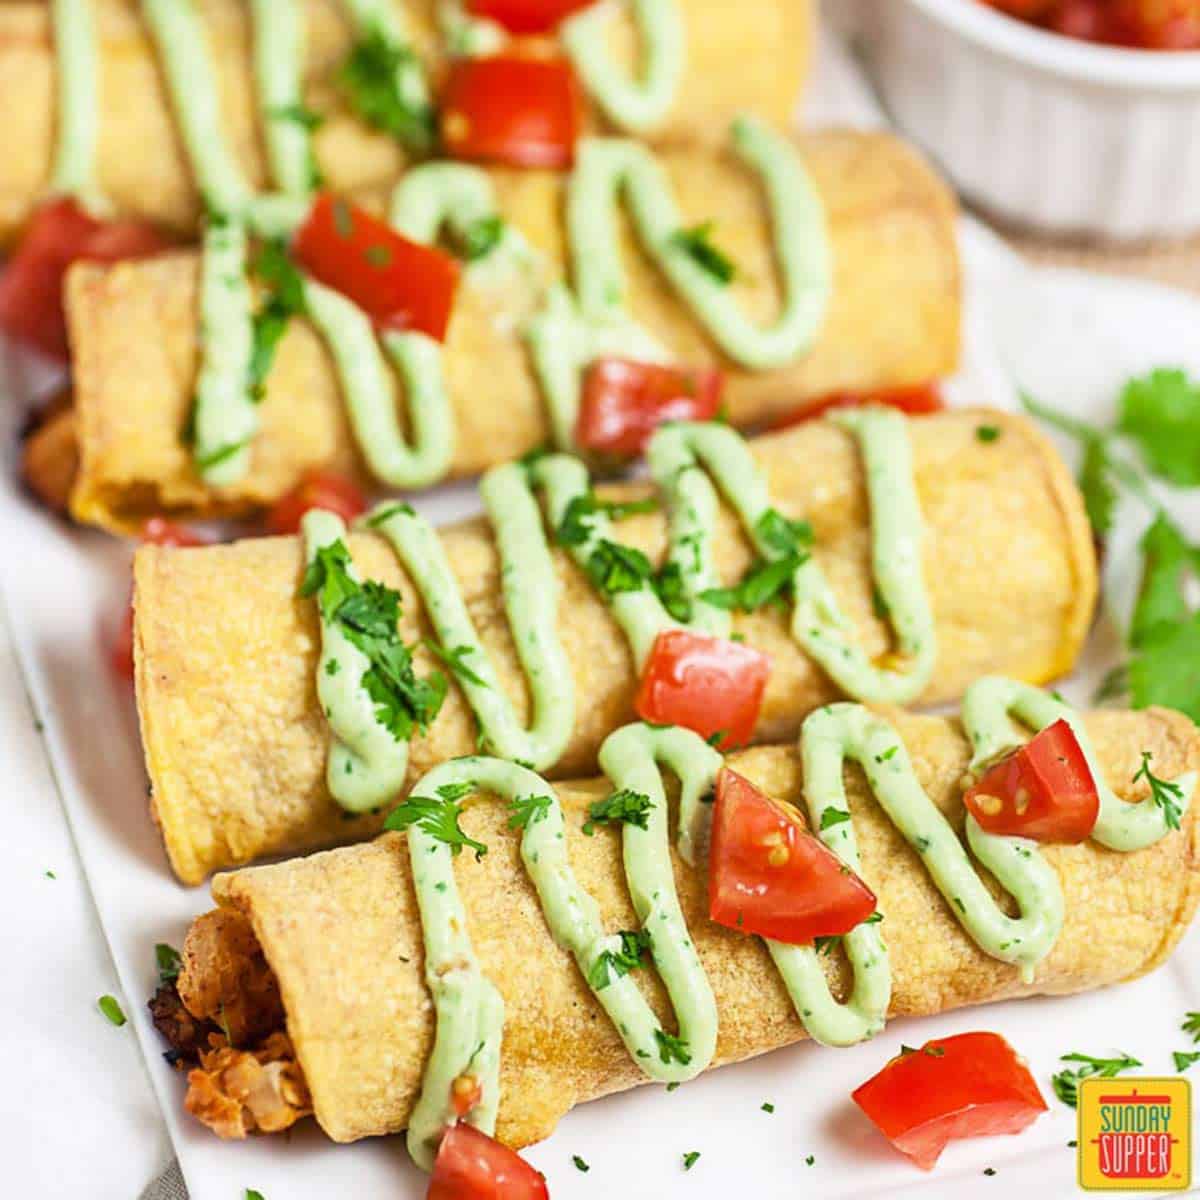 Row of 4 chicken taquitos with avocado crema and fresh tomatoes